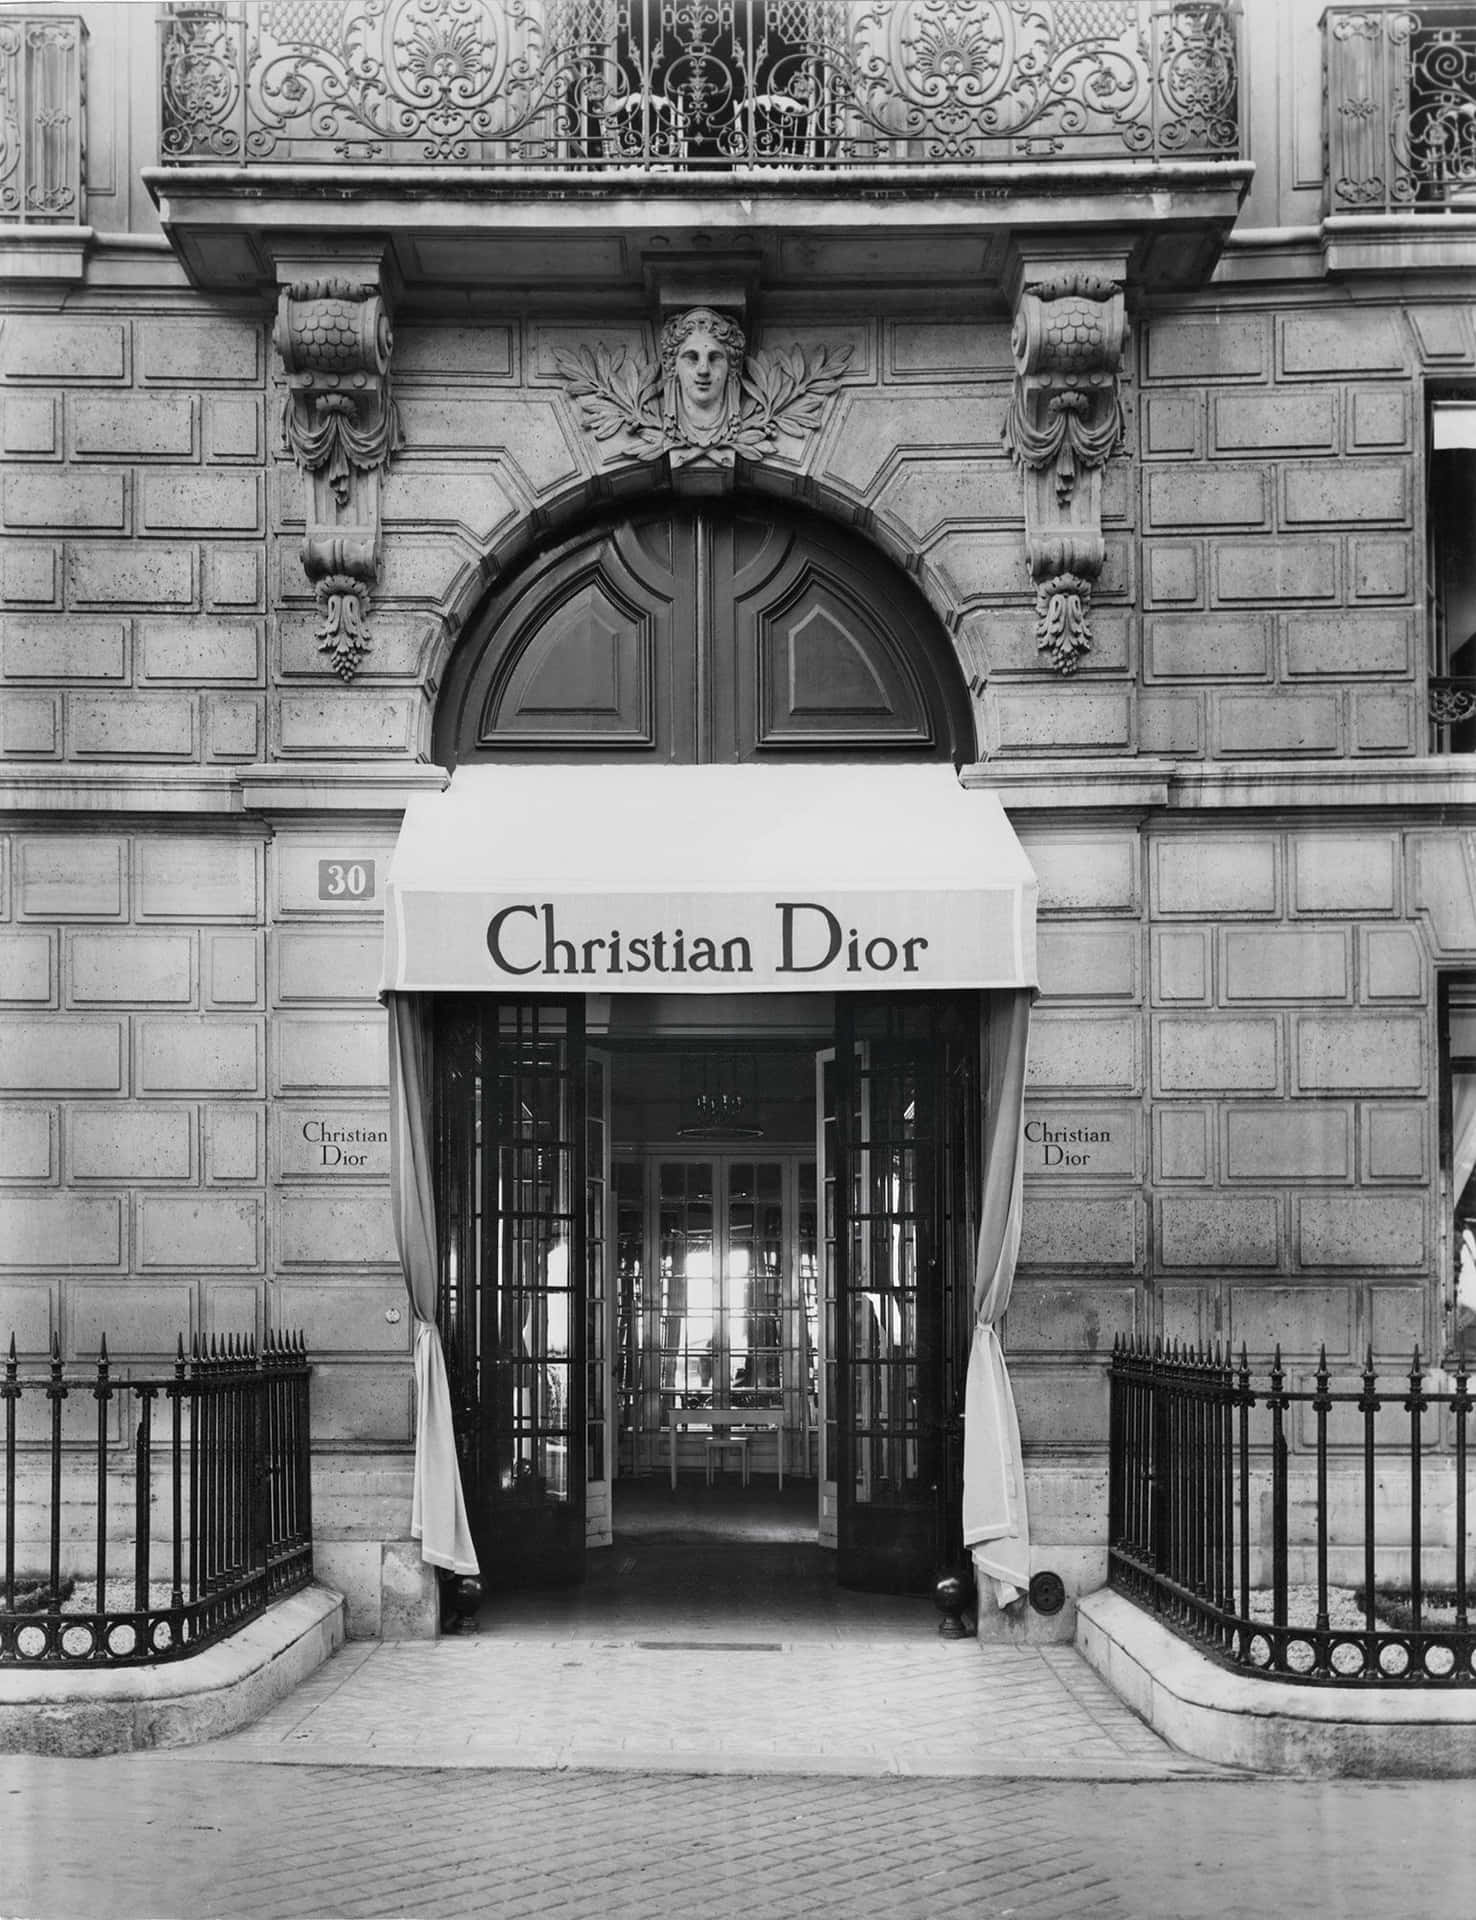 A Black And White Photo Of A Building With A Sign For Christian Dior